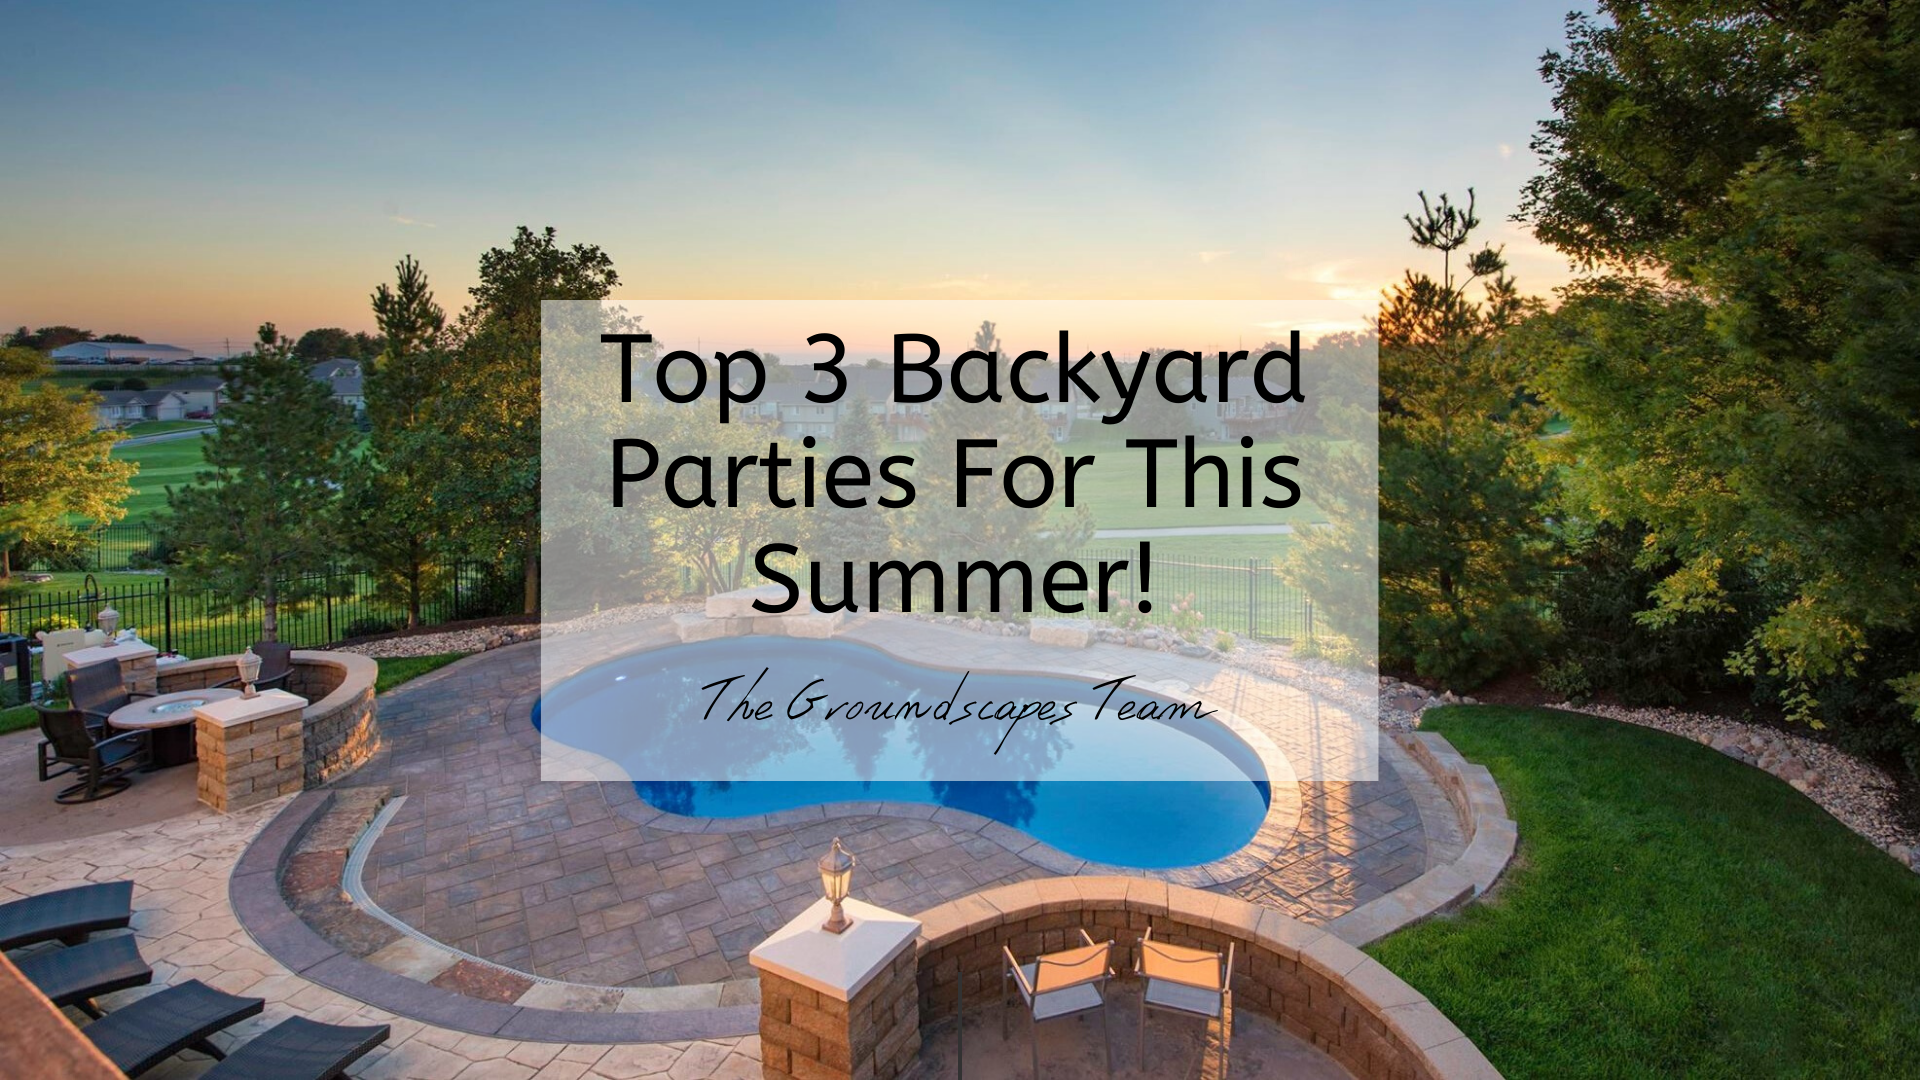 Top 3 Backyard Parties For This Summer!